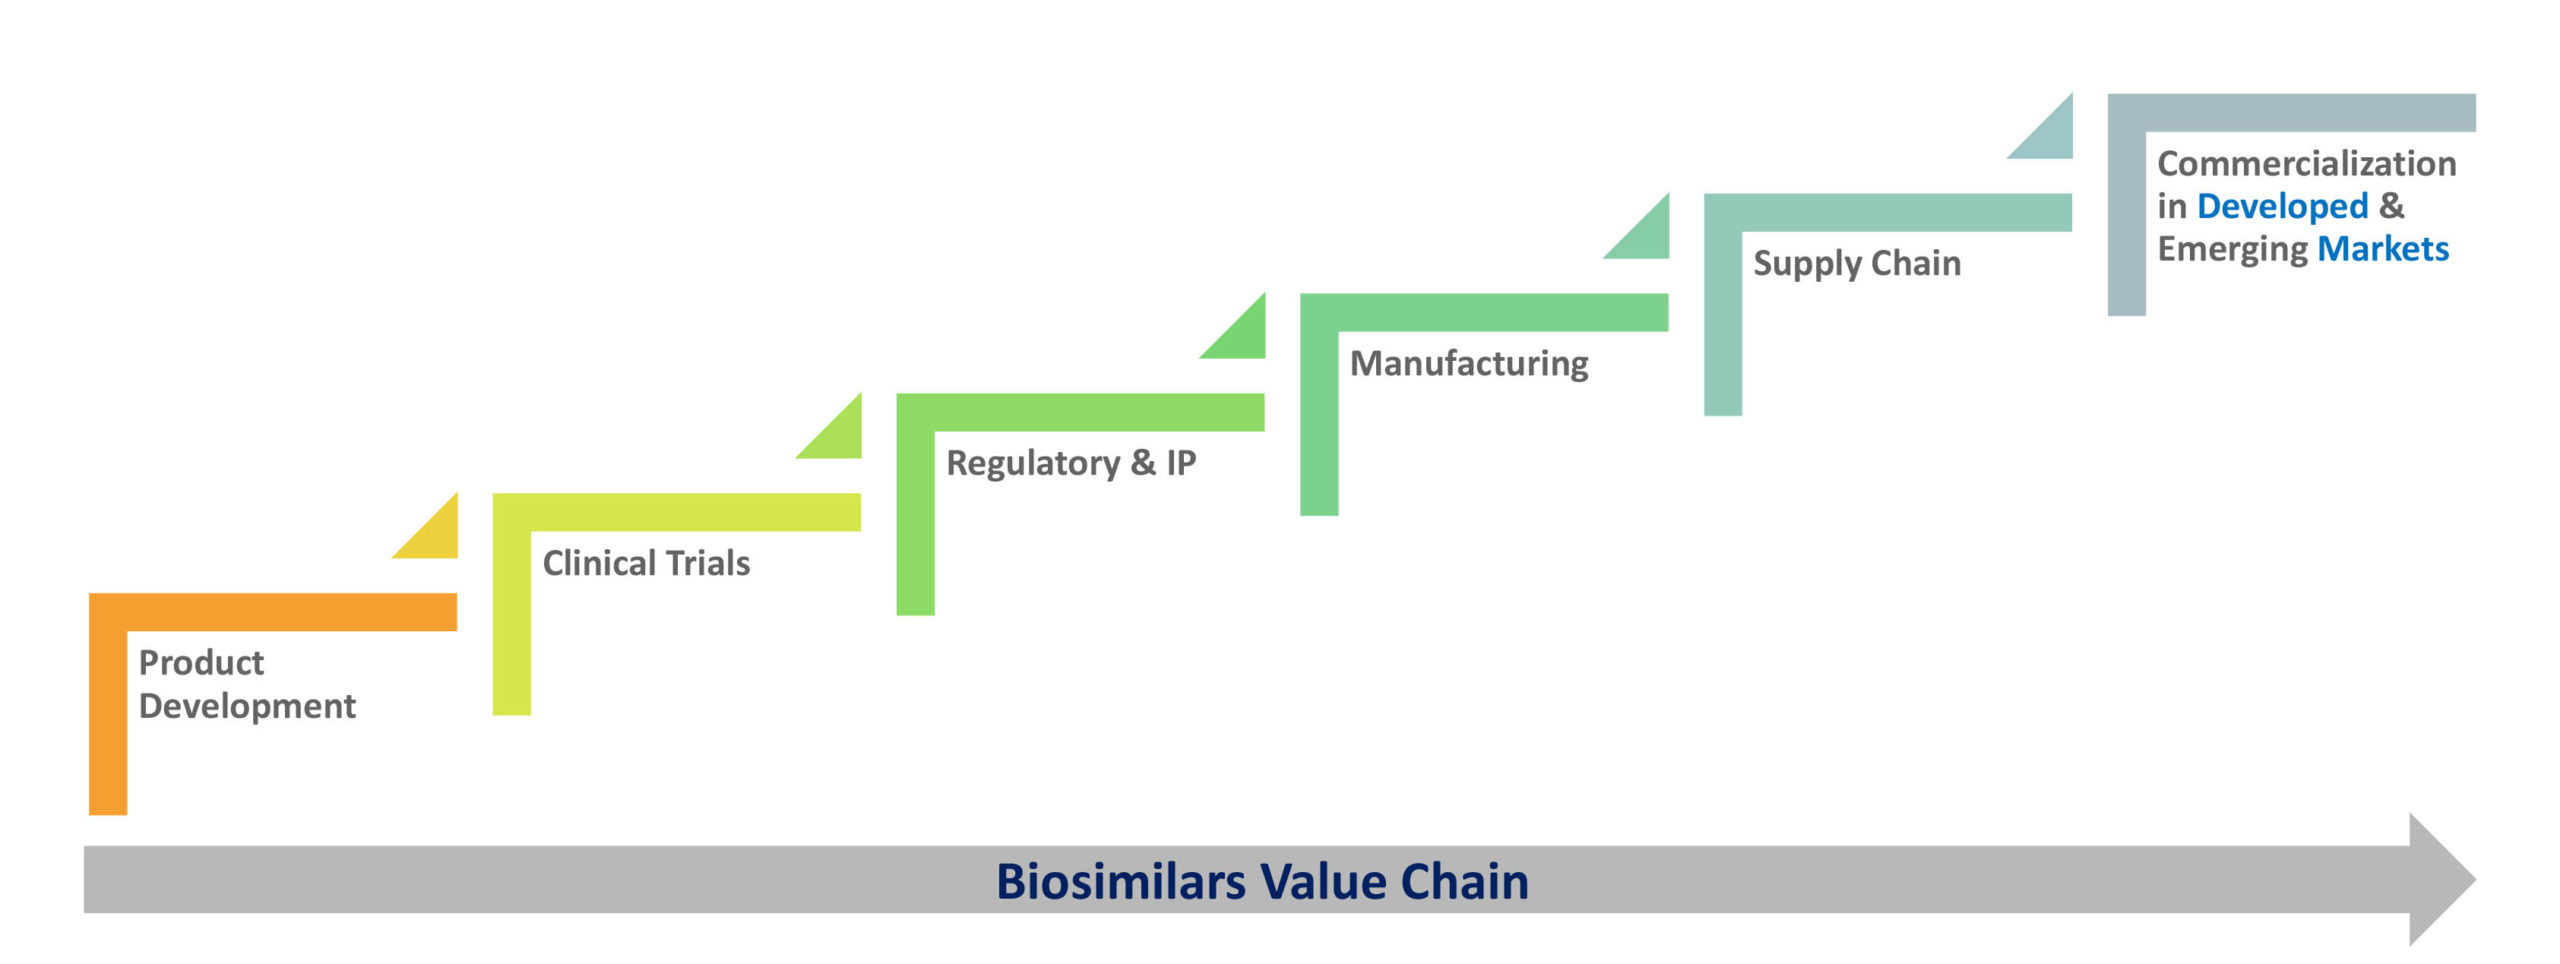 To be A Fully Integrated Biosimilars Enterprise